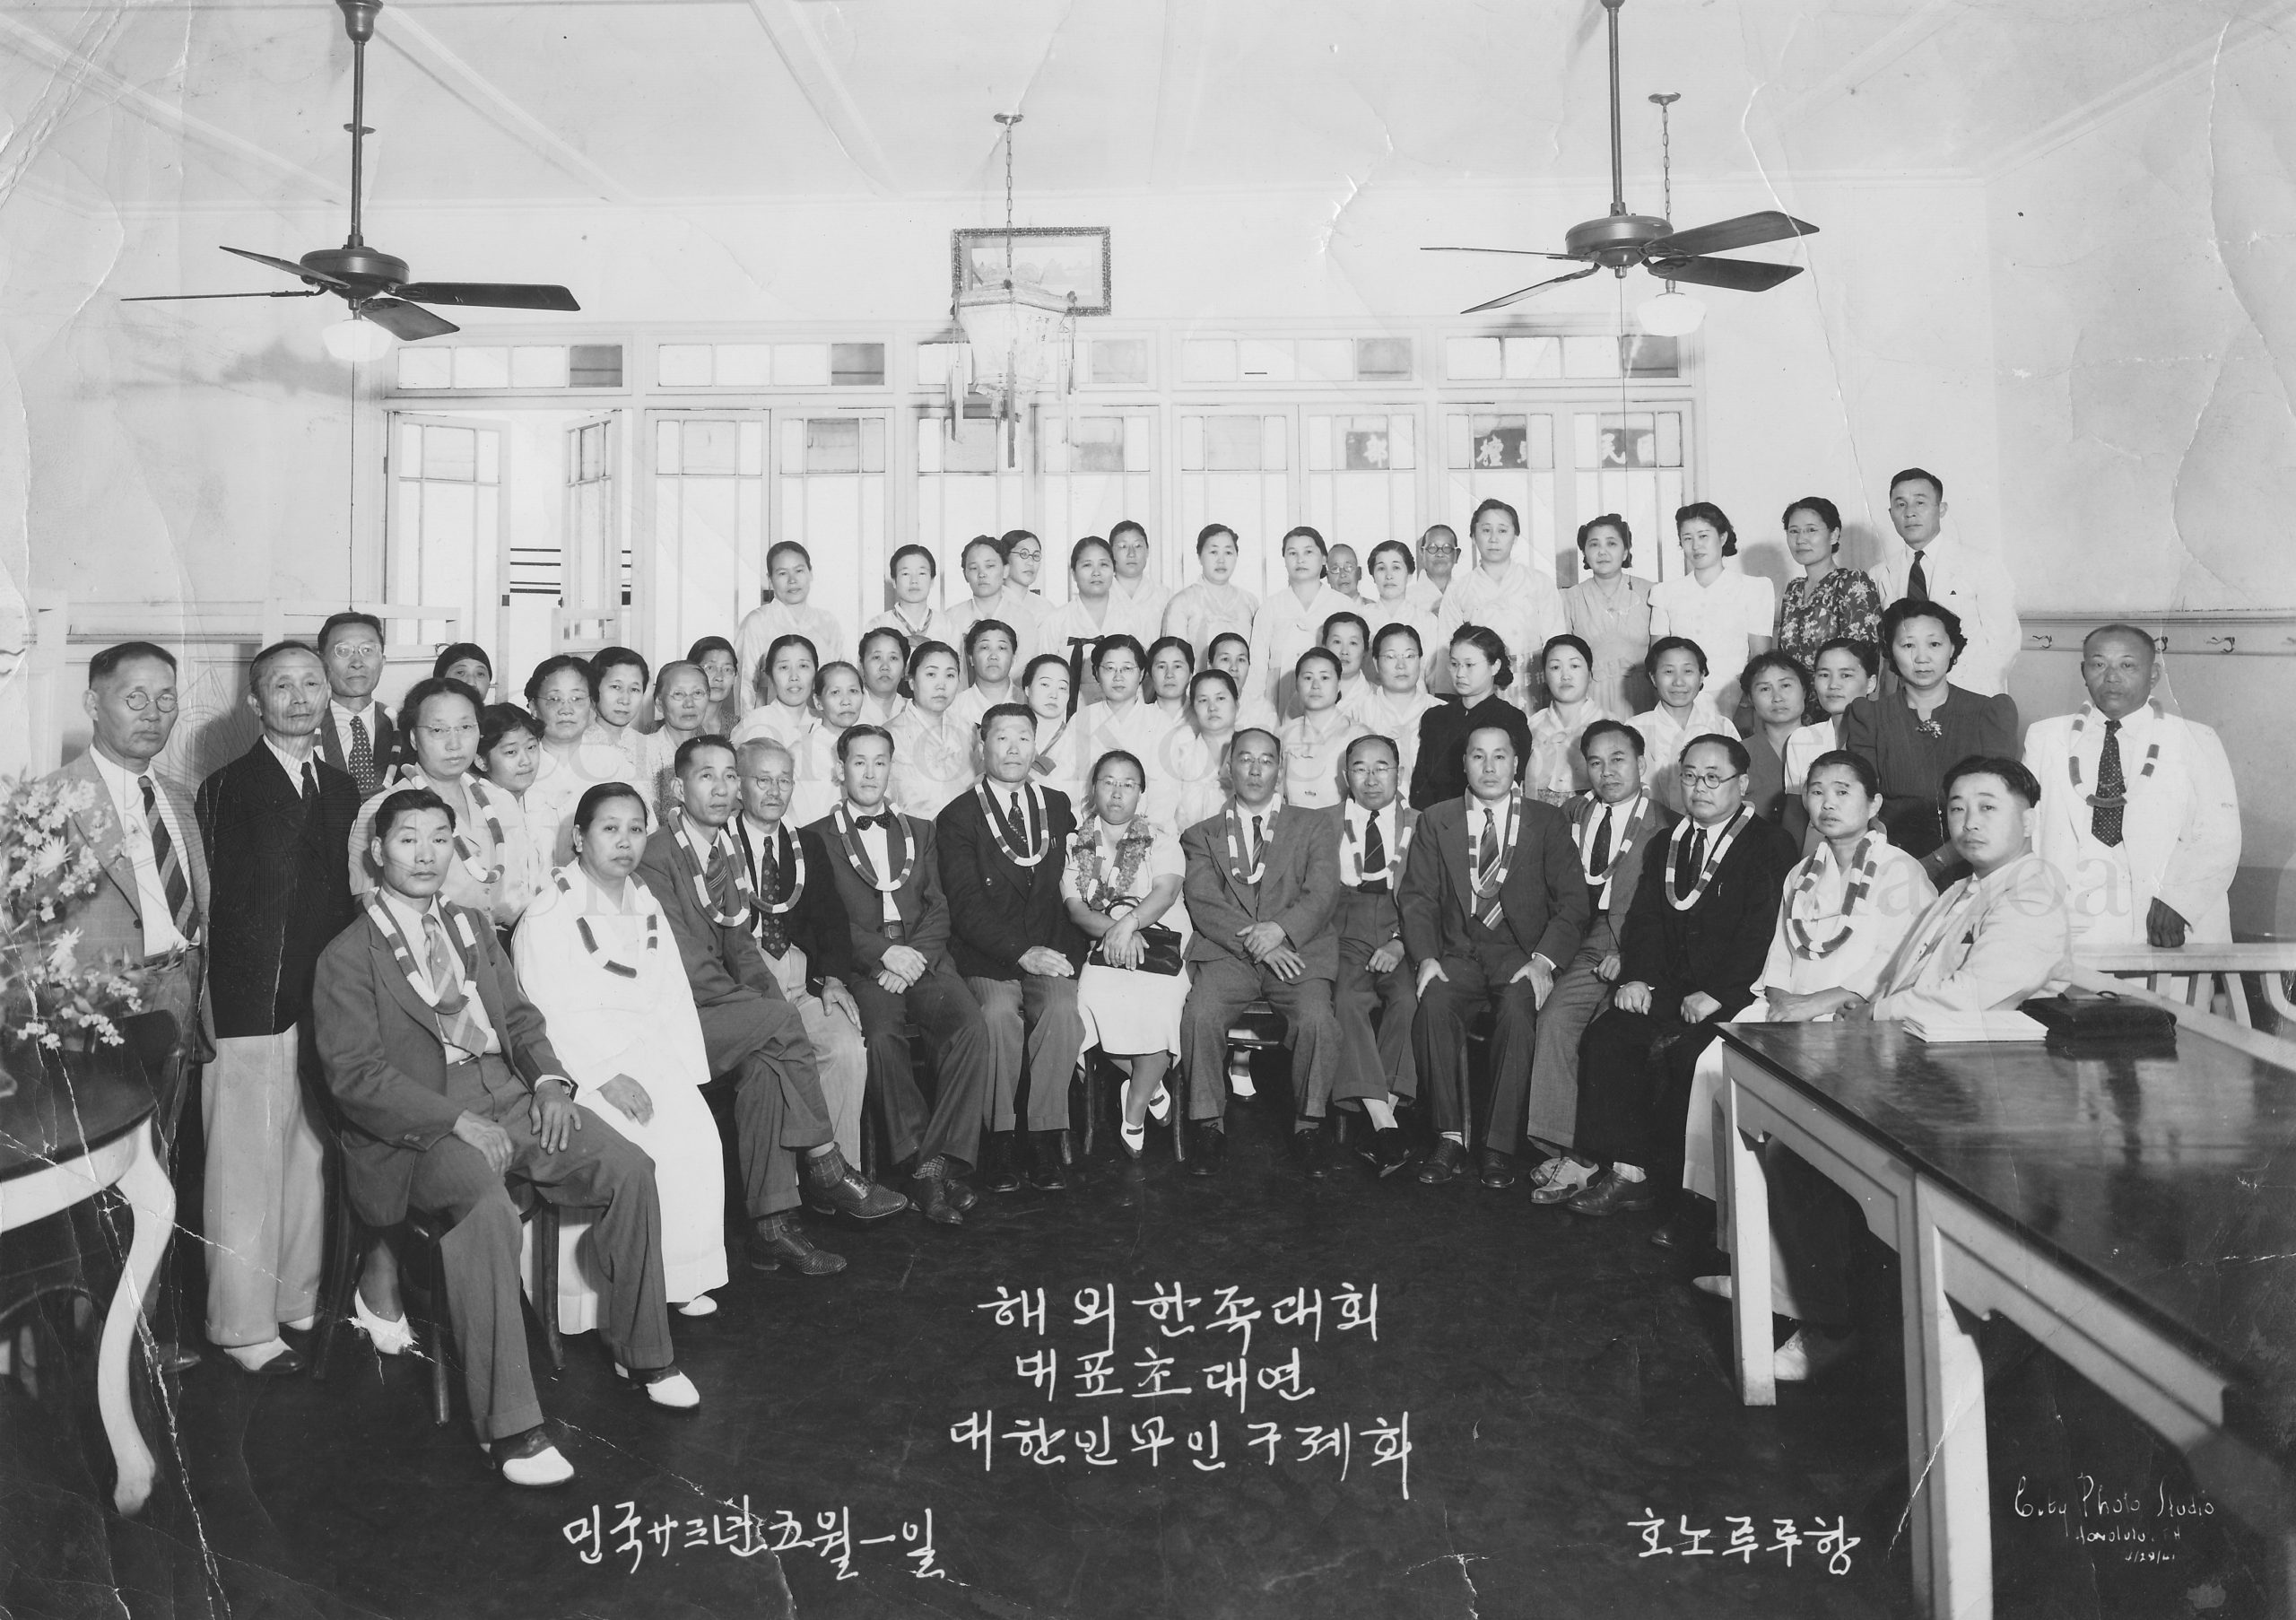 After the KWRS’ reception banquet for the Overseas United Koreans Committee, 1941 (Young Ok Kang collection)